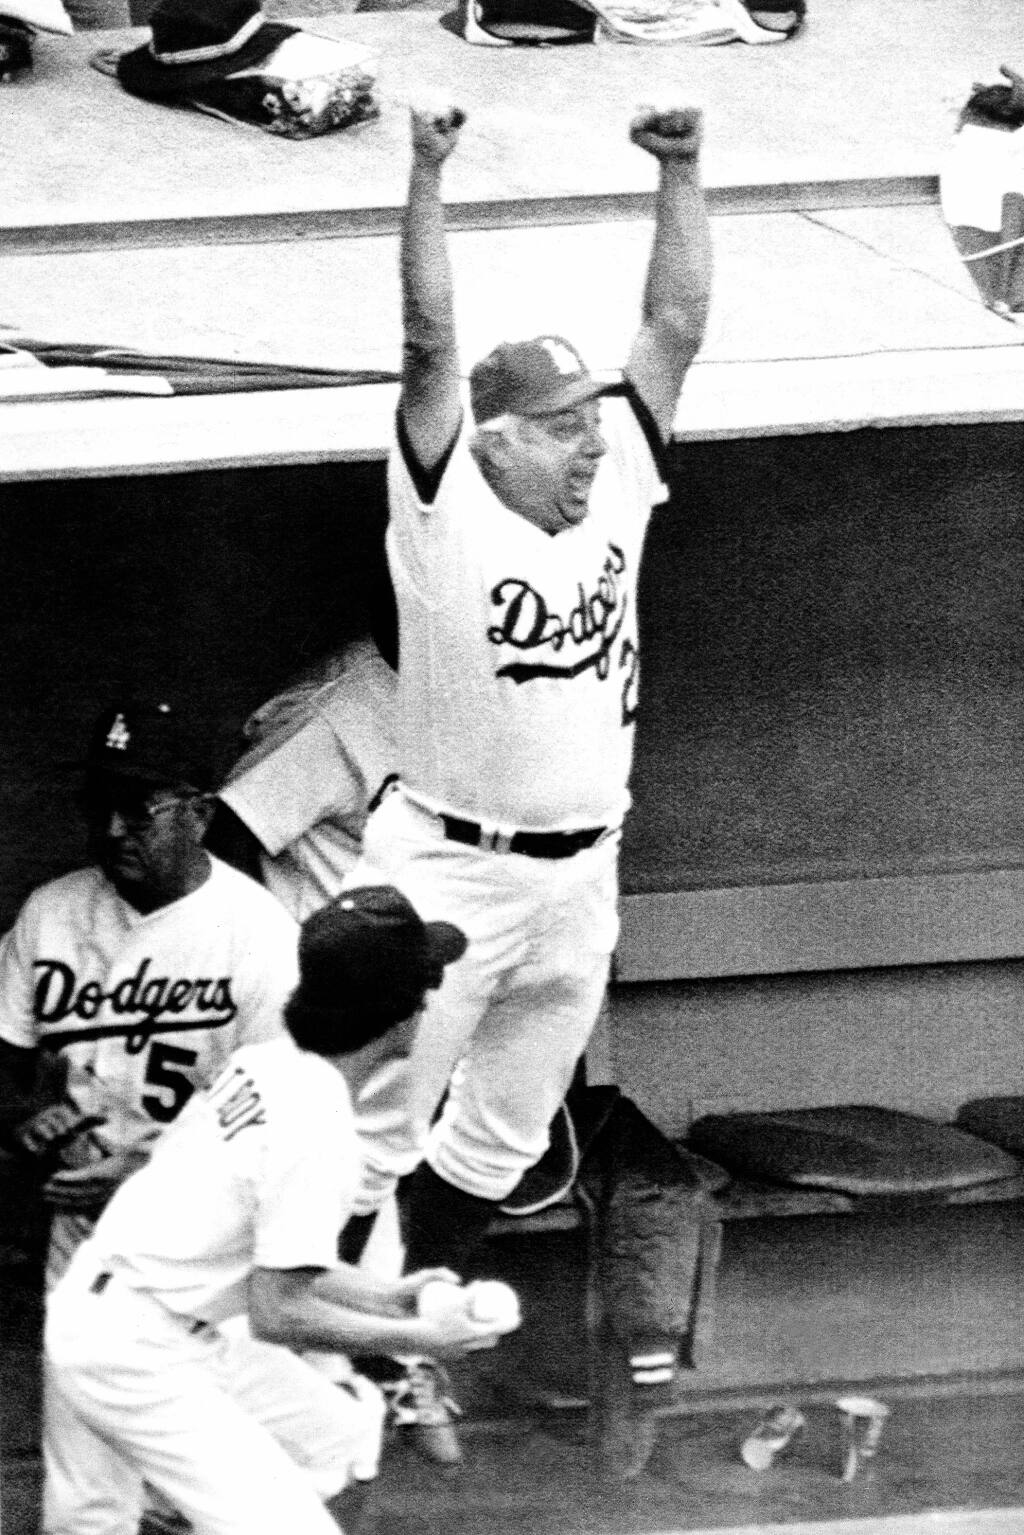 Tommy Lasorda Cursing a Blue Streak During the 1977 World Series